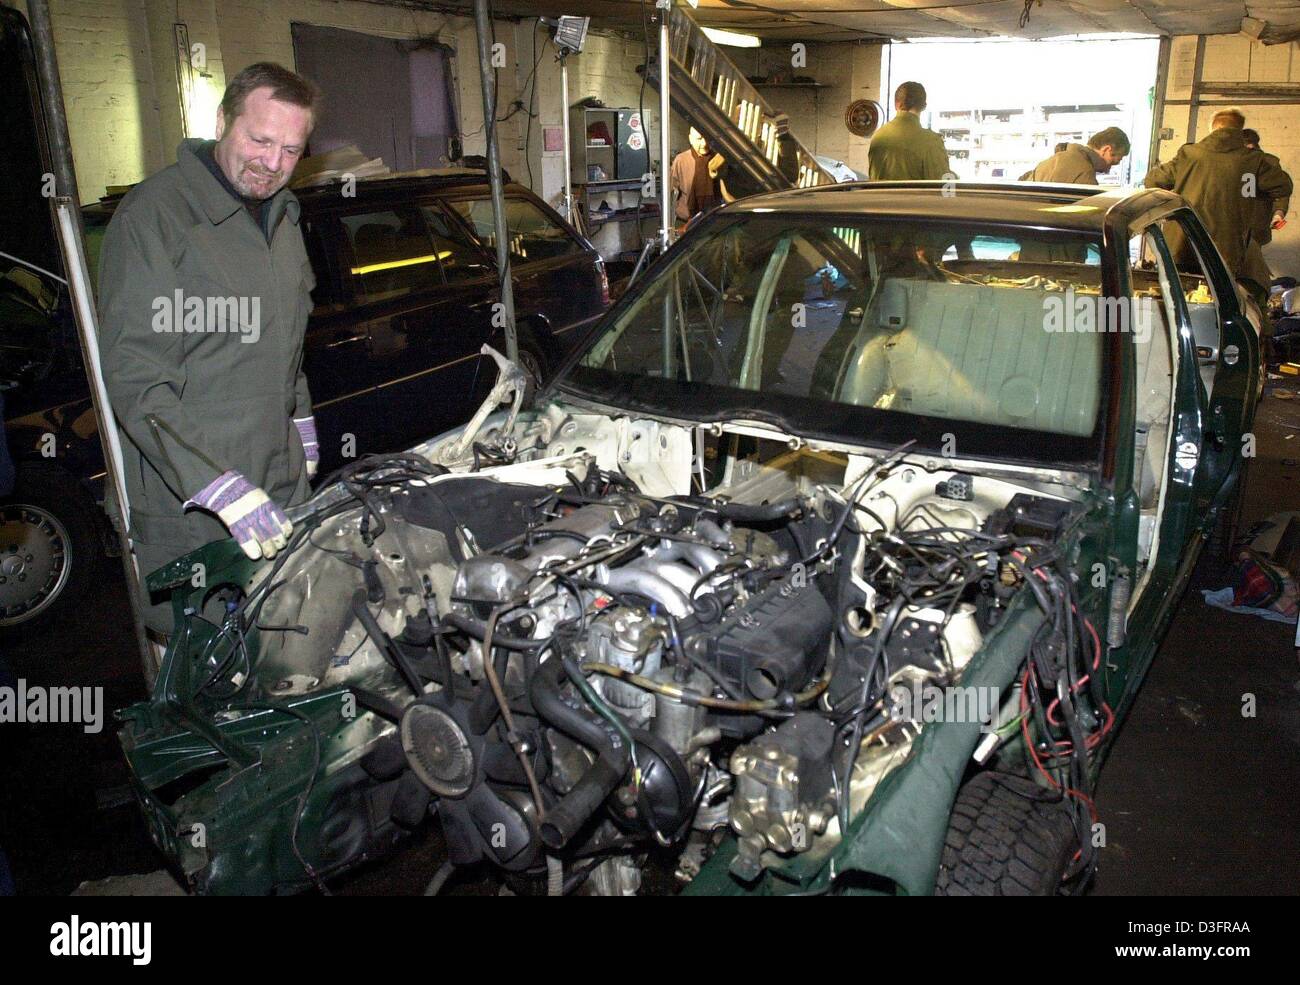 (dpa) - Police examine stolen, stripped down cars in a workshop on the premises of a closed down munitions factory in Quickborn, northern Germany, 26 February 2003.  An international ring of car thieves allegedly took apart stolen cars at the workshop and shipped the parts to Lithuania, where the cars were then reconstructed.  Police have already identified ten of the stolen vehicl Stock Photo